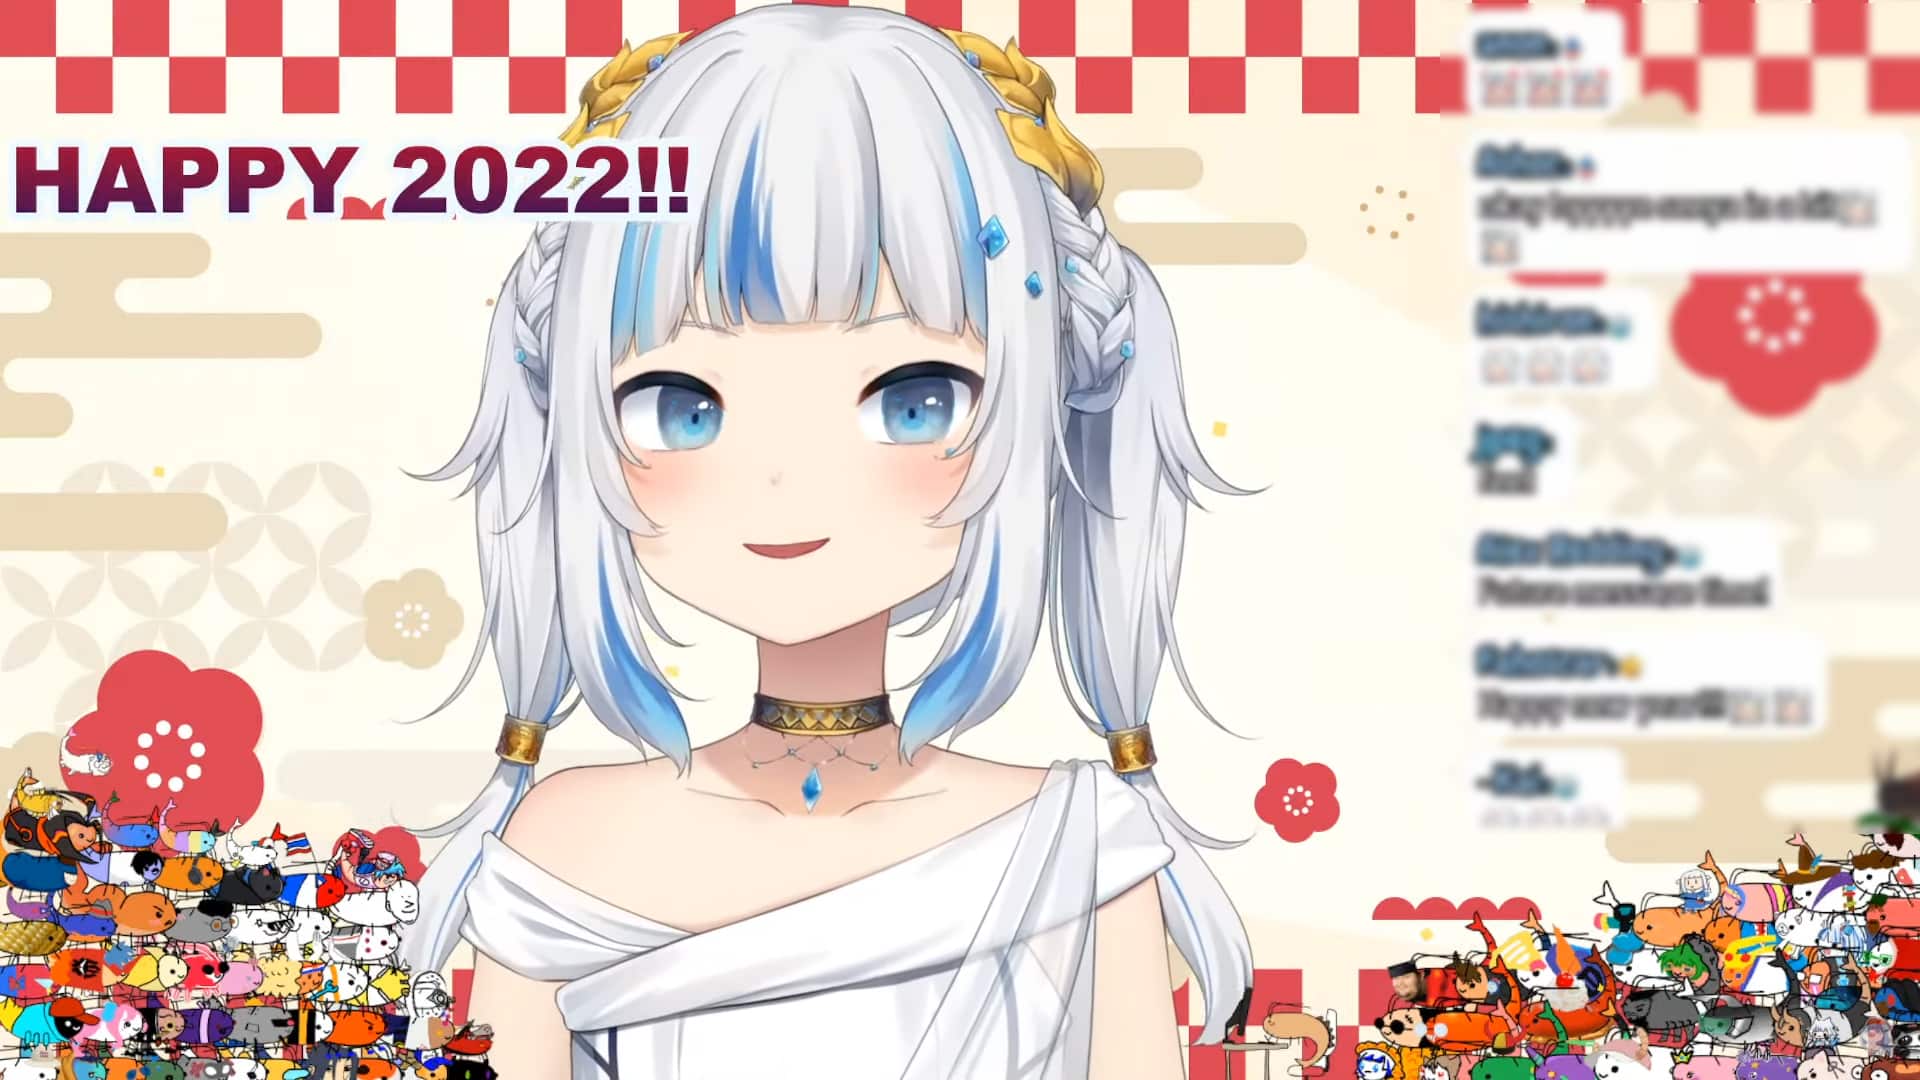 Hololive VTuber star Gawr Gura talking to chat on New year's stream 2022